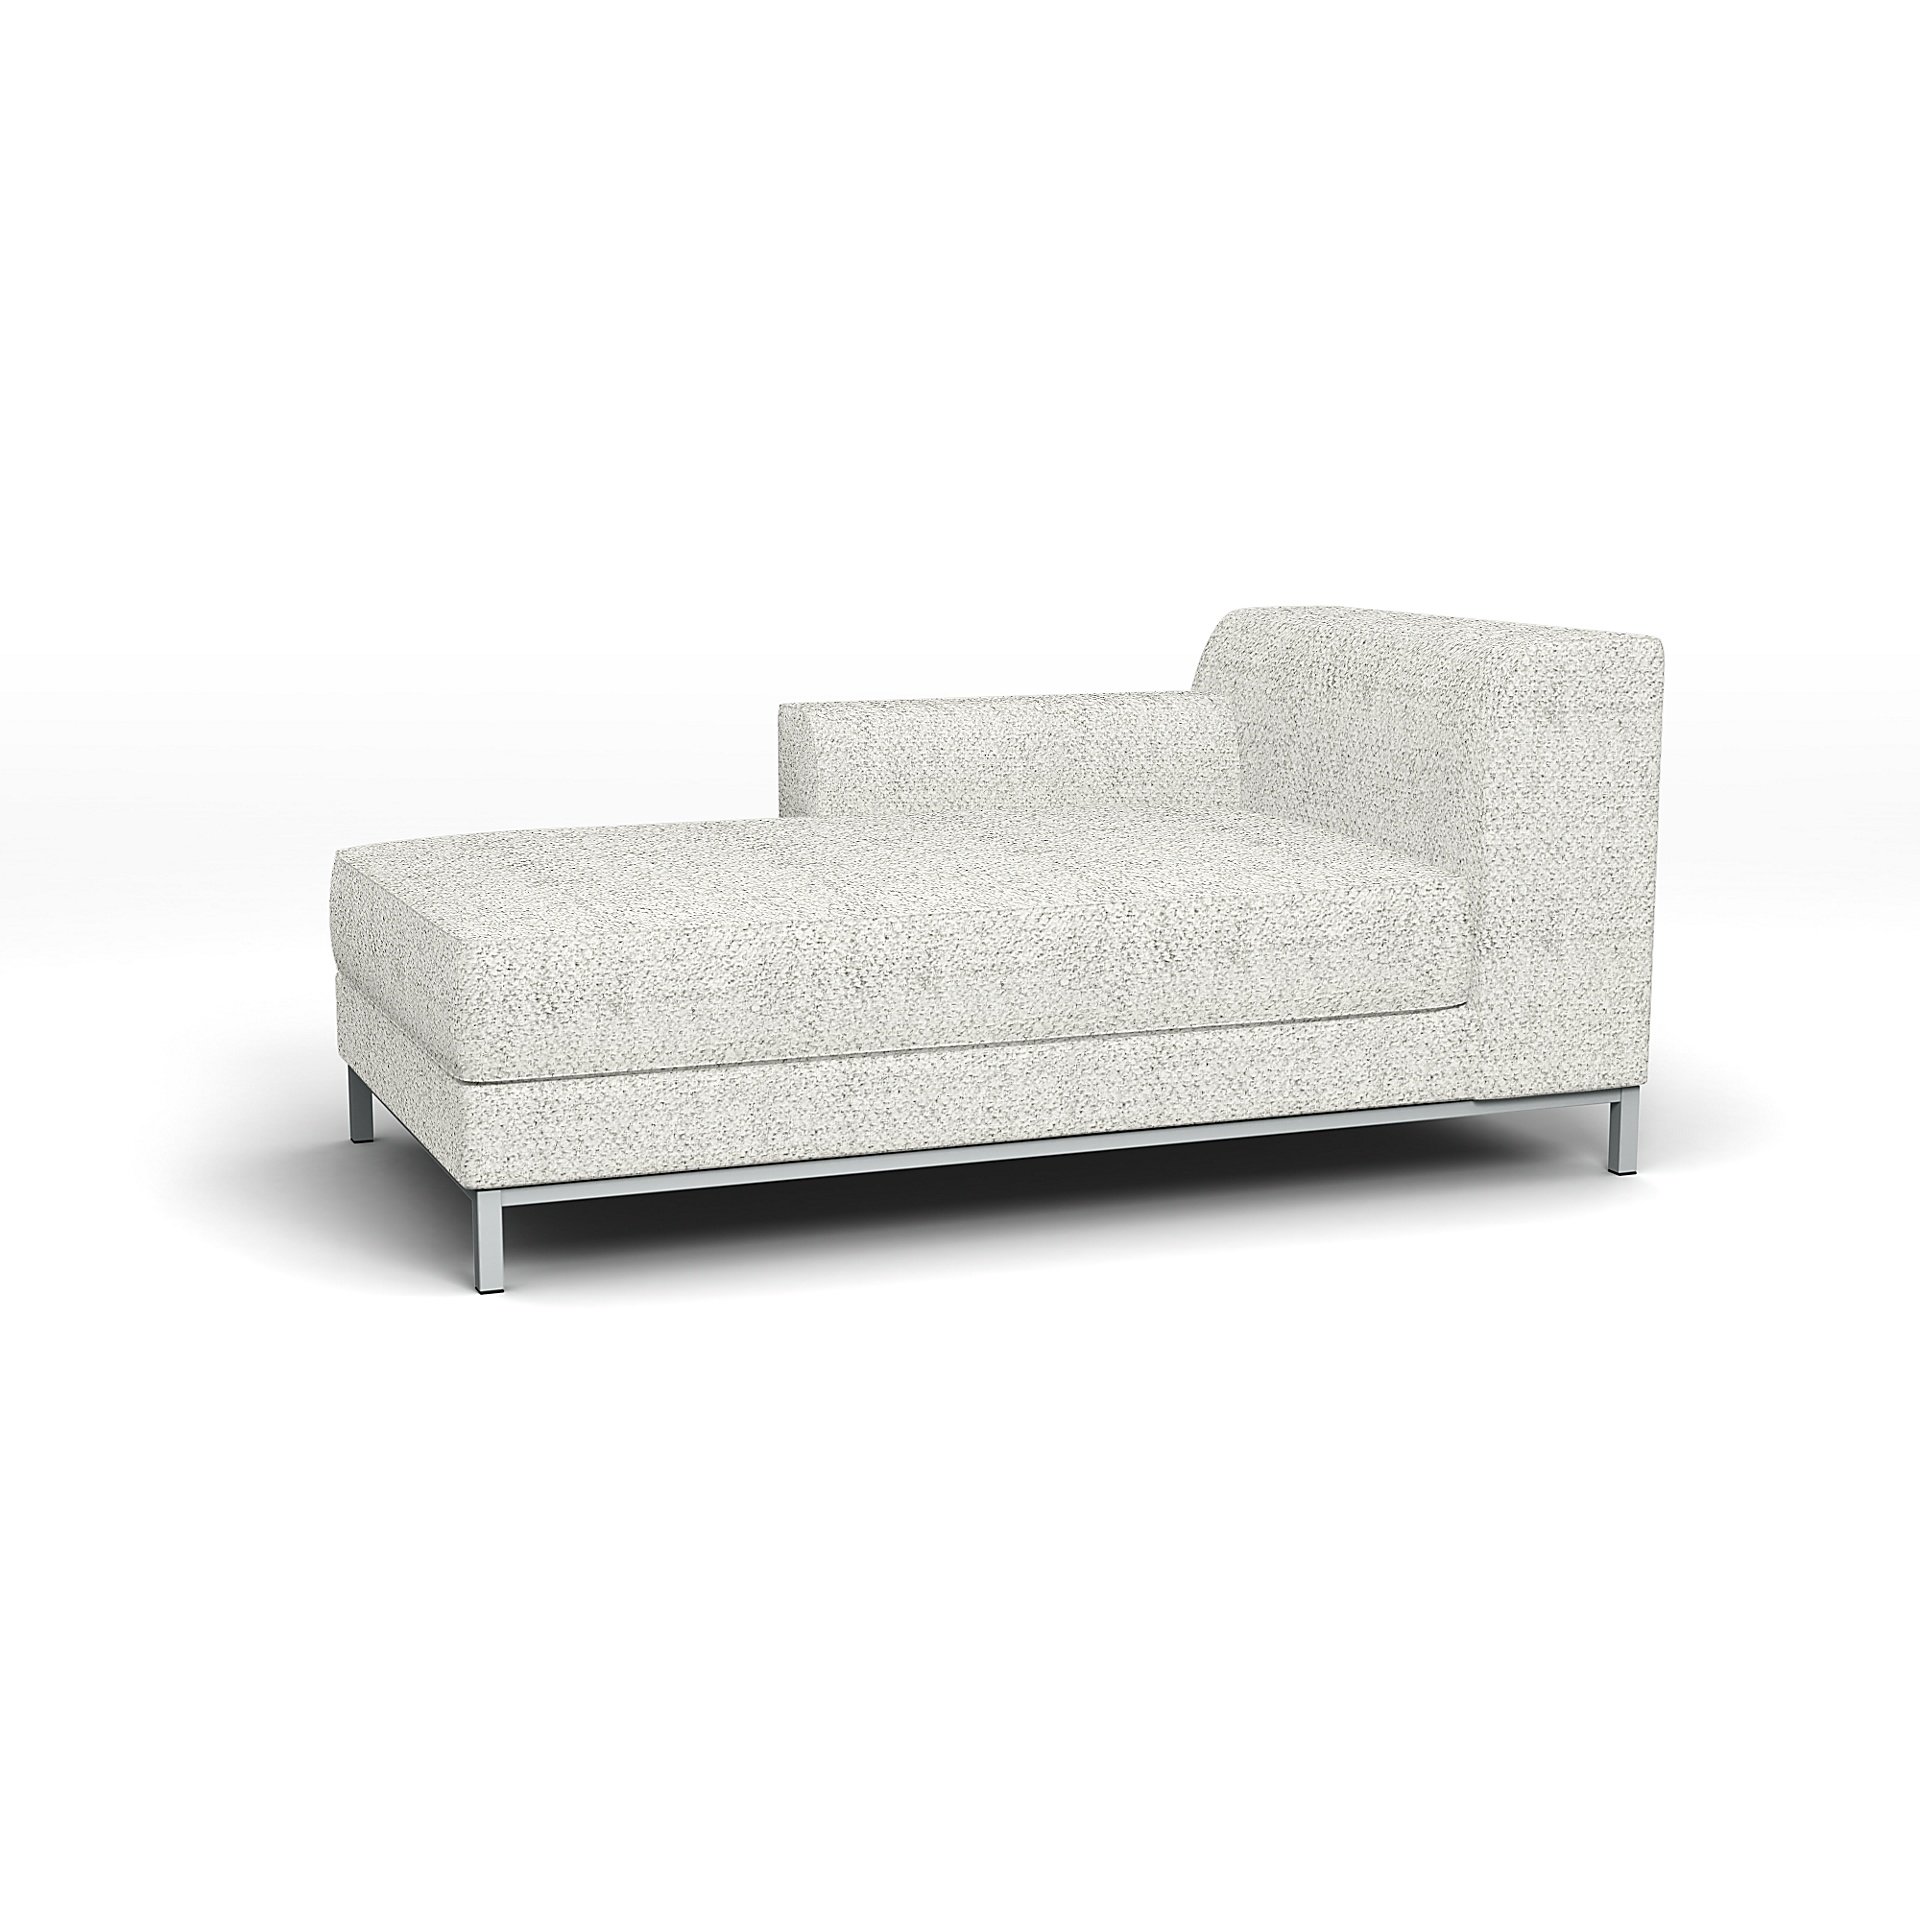 IKEA - Kramfors Chaise Longue with Left Arm Cover, Ivory, Boucle & Texture - Bemz